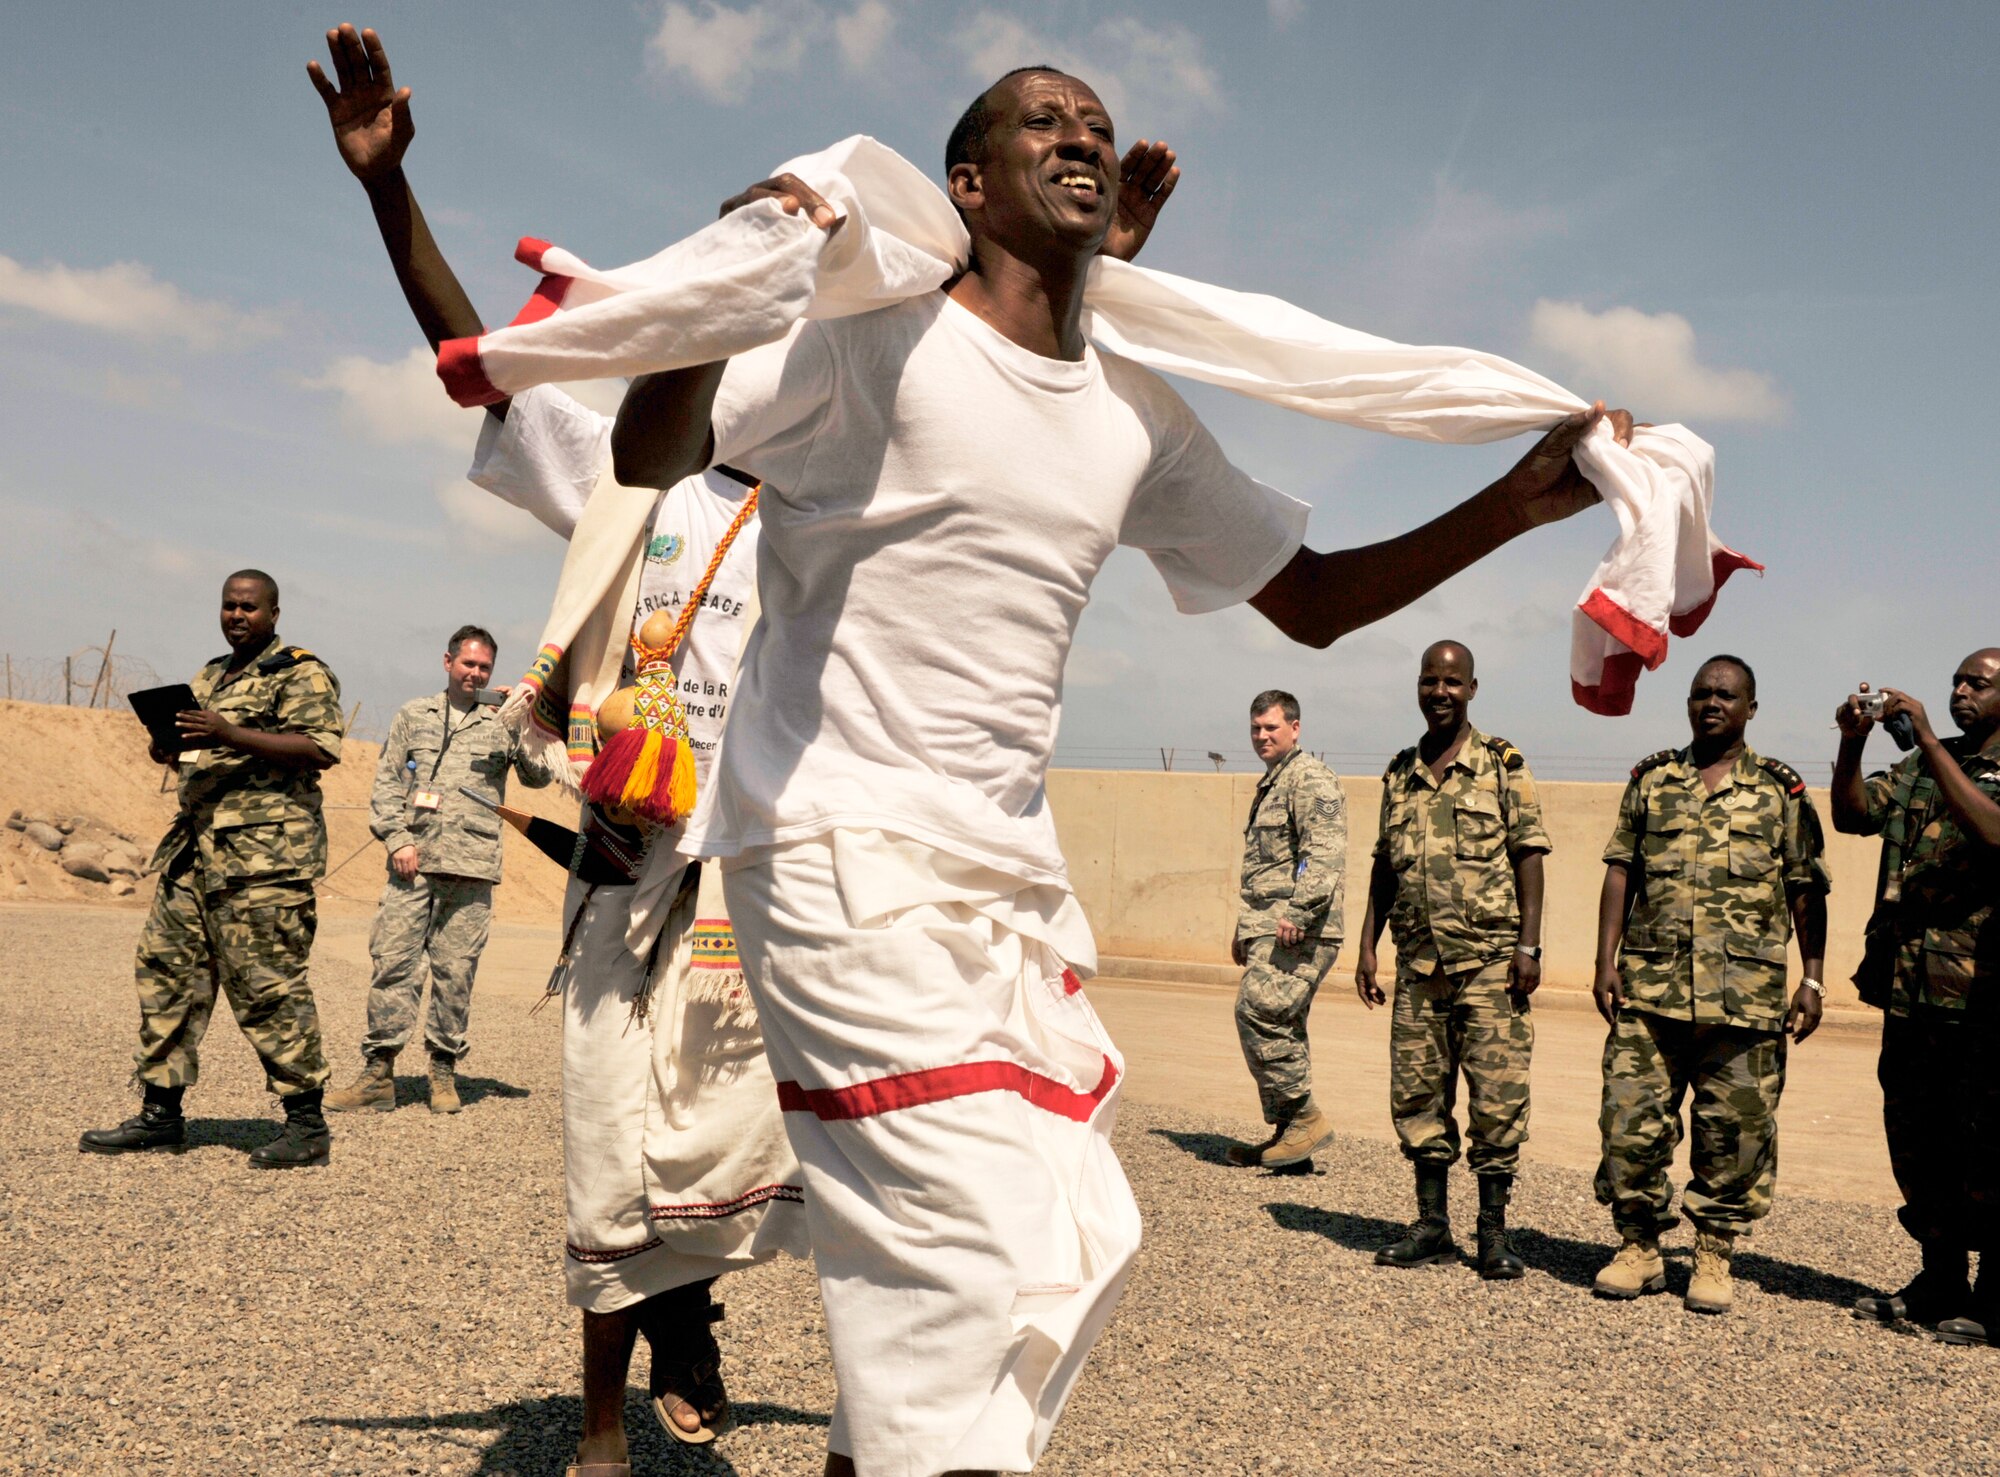 A Djiboutian air force member performs a traditional dance as part of a cultural exchange during African Partnership Flight???Djibouti at Djibouti Air Base, Feb. 9, 2015. African Partnership Flight is the premiere program to bring together partner nations to increase cooperation and interoperability, which fosters stability and security throughout the continent. (U.S. Air Force Photo by Tech. Sgt. Ian Dean)Base, Feb. 9, 2015.  African Partnership Flight is the premiere program to bring together partner nations to increase cooperation and interoperability, which fosters stability and security throughout the continent. (U.S. Air Force Photo by Tech. Sgt. Ian Dean)